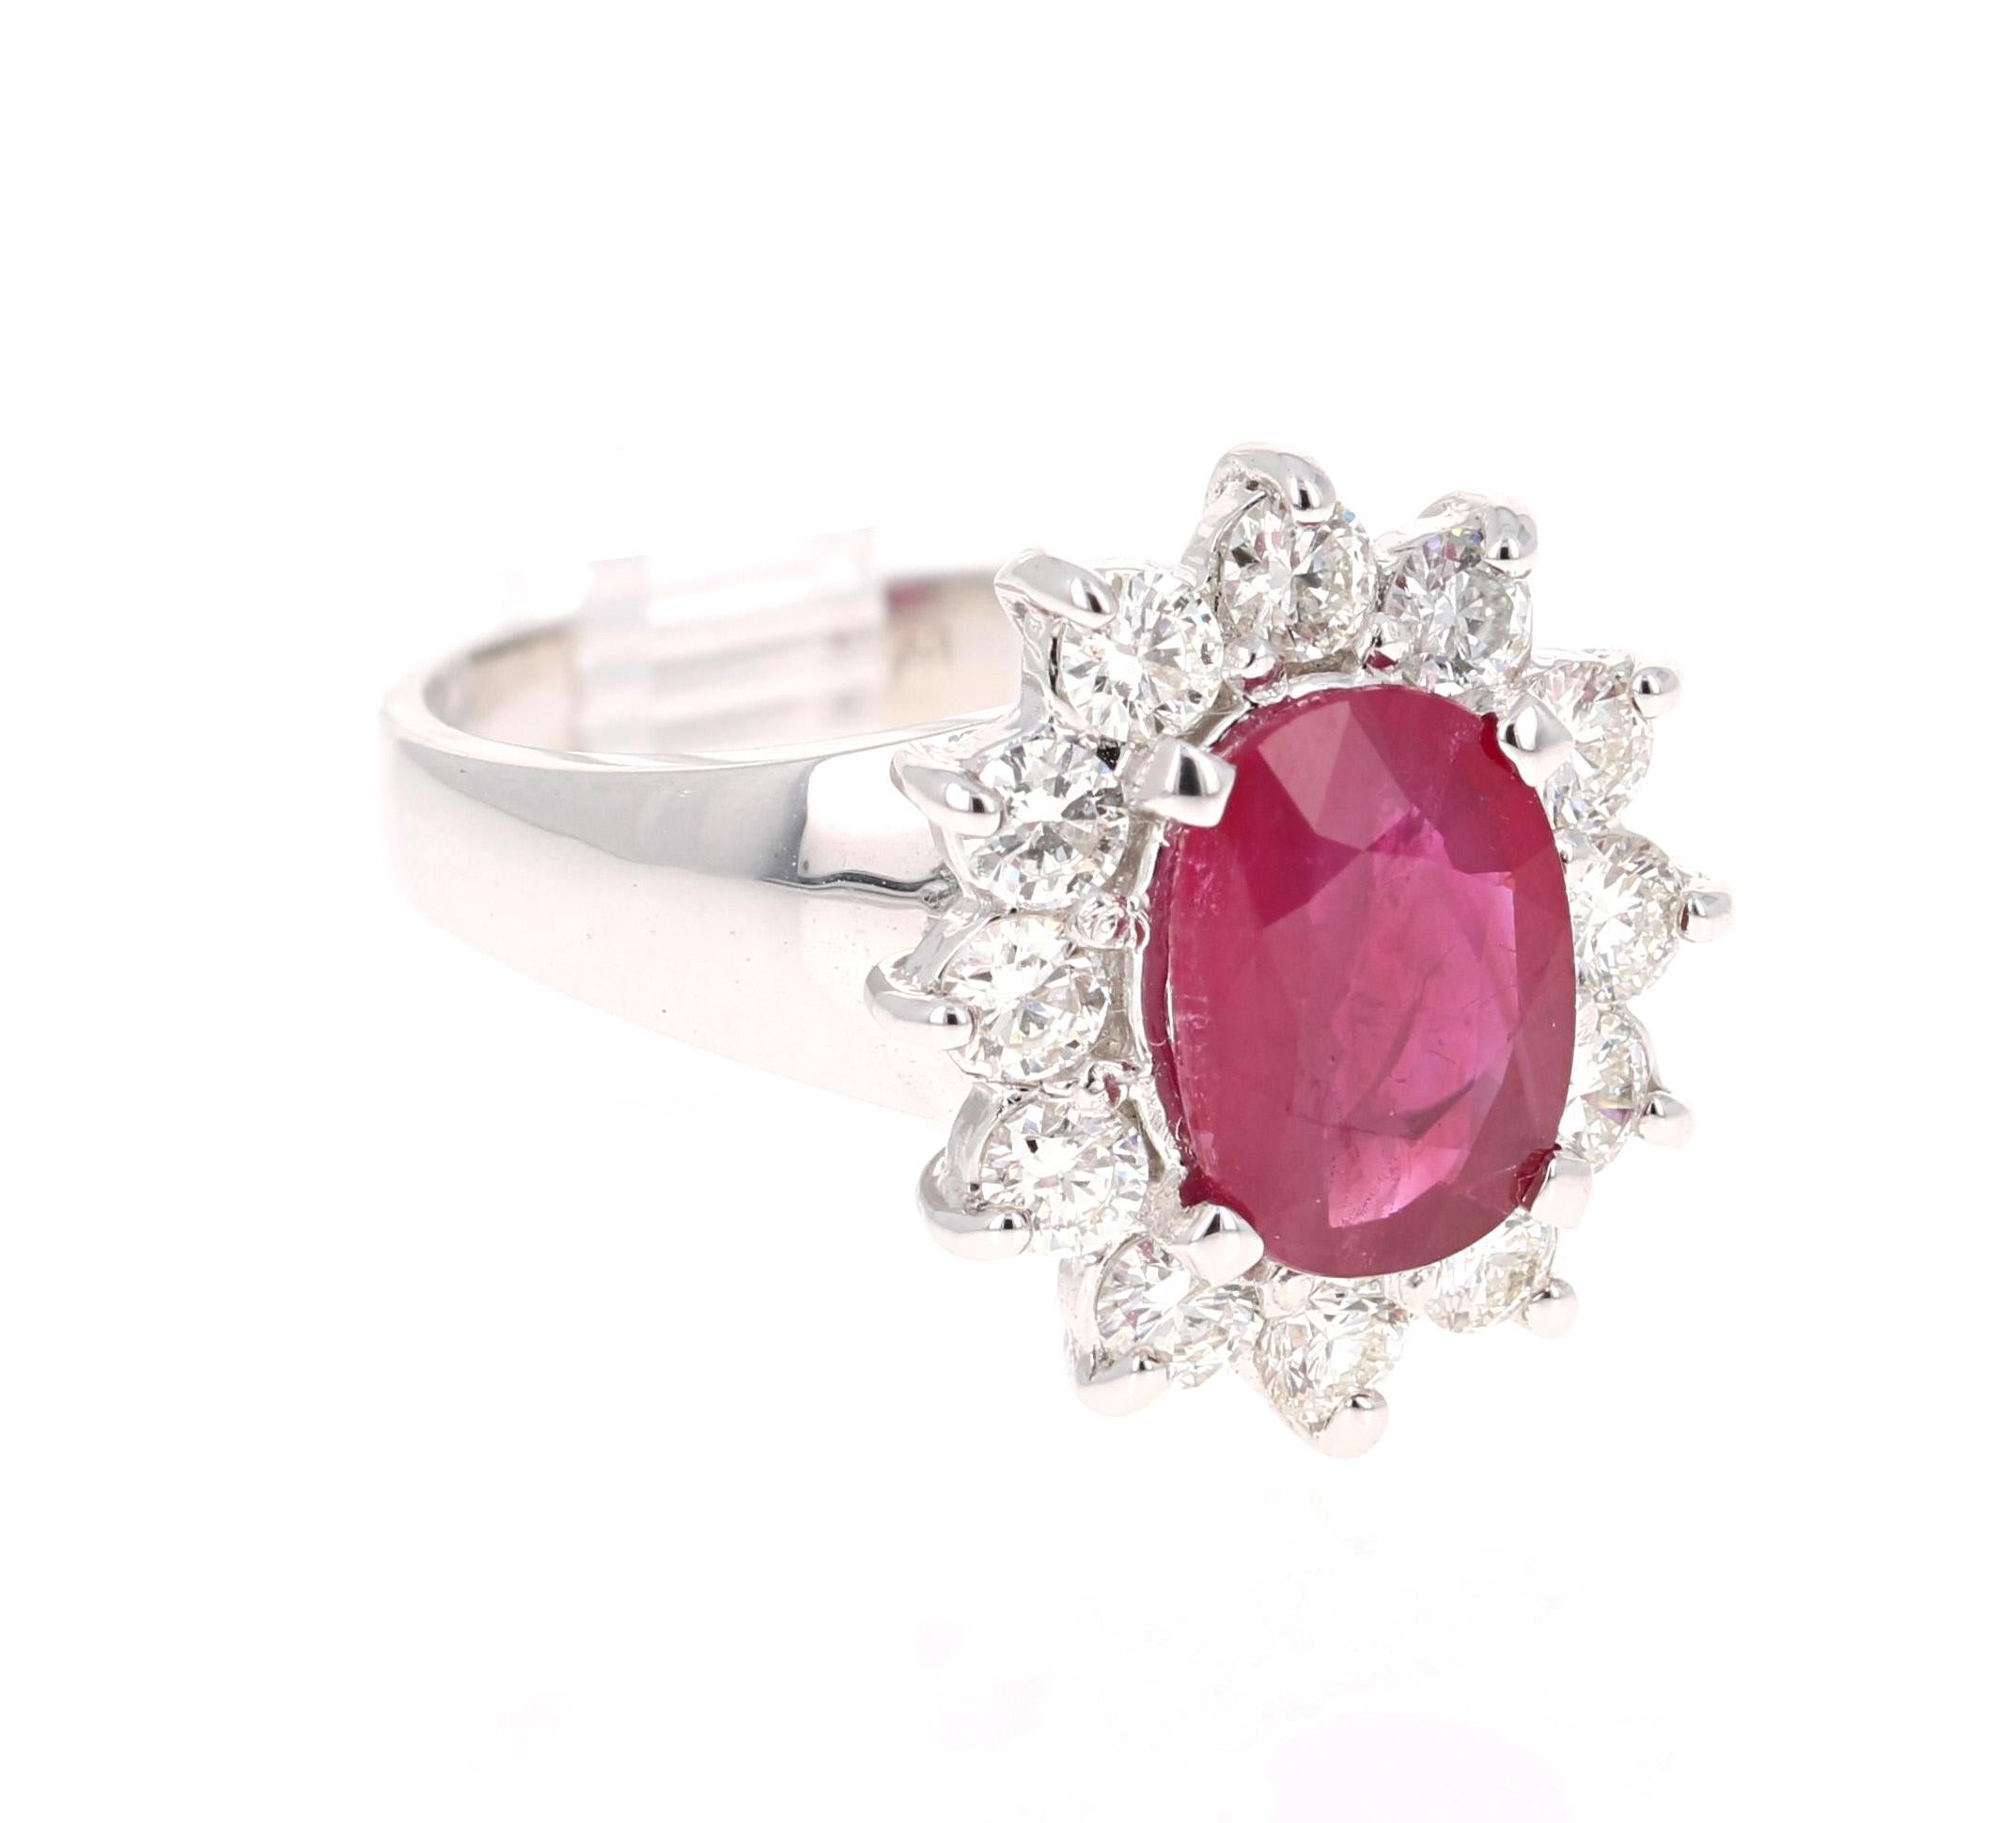 Simply beautiful Ballerina Ruby Diamond Ring with a Oval Cut 2.04 Carat Ruby which is surrounded by 12 Round Cut Diamonds that weigh 0.82 carats. The total carat weight of the ring is 2.86 carats. The clarity and color of the diamonds are VS-F. The